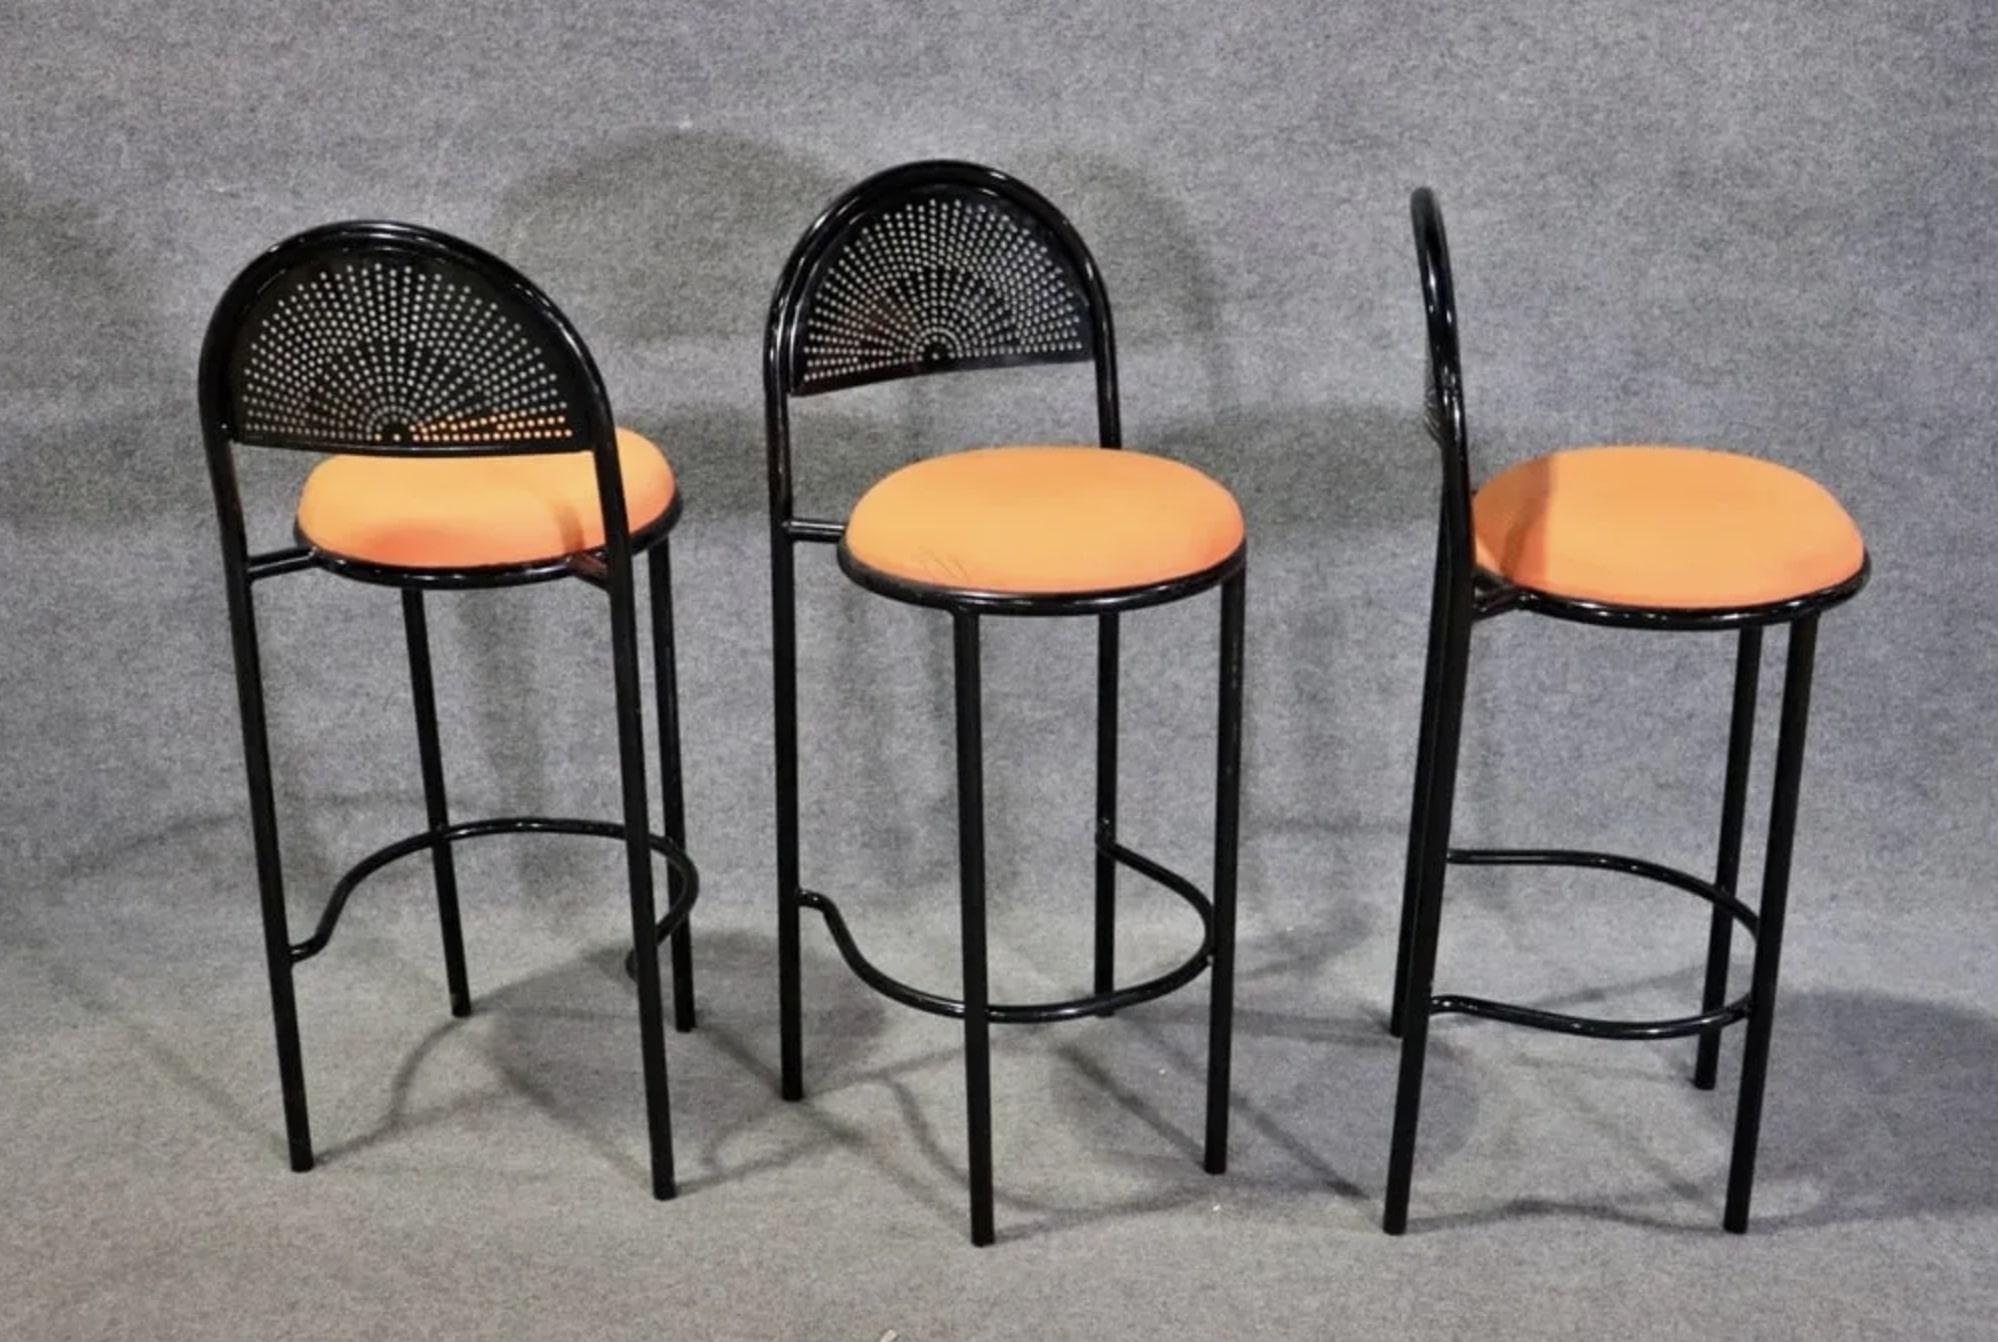 Set of 3 Metal Stools In Good Condition For Sale In Brooklyn, NY